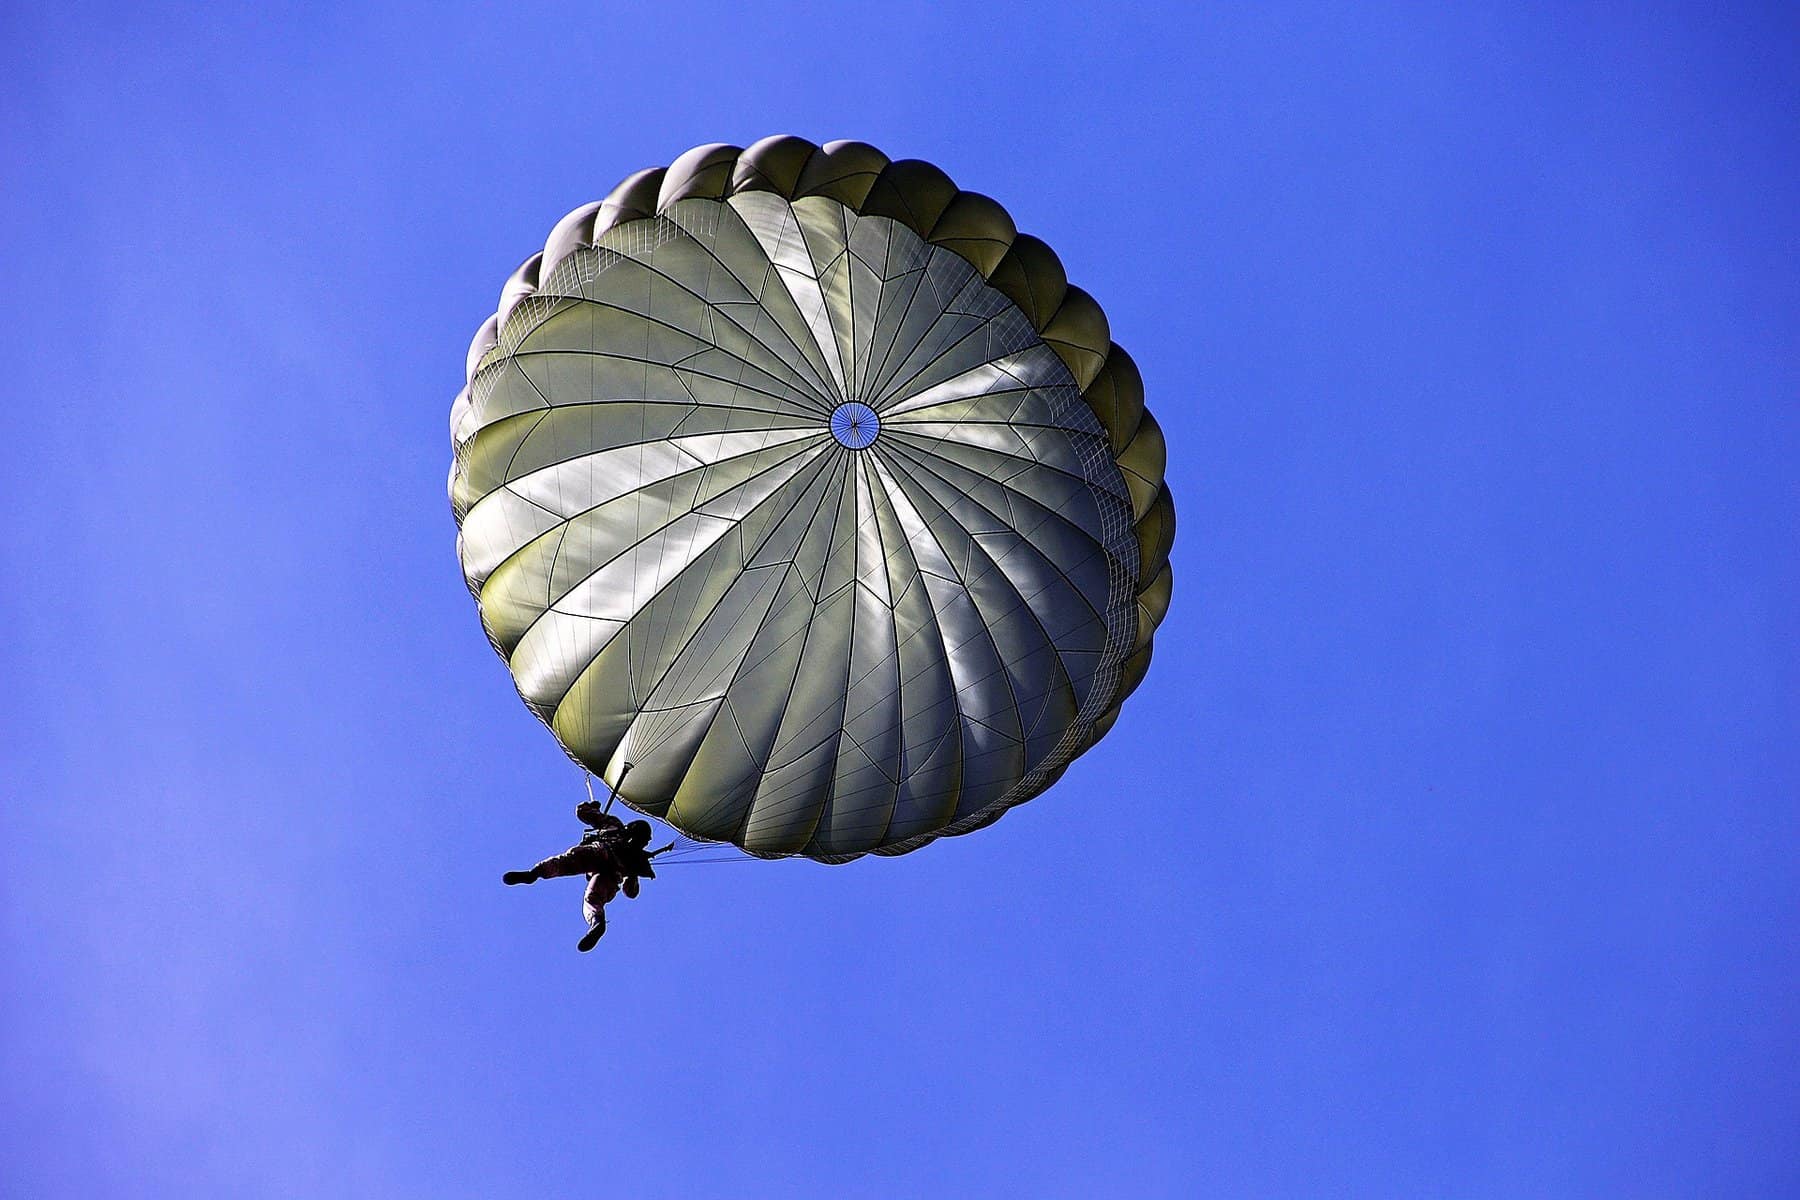 A person is shown from below dangling from a white, fully expended parachute.